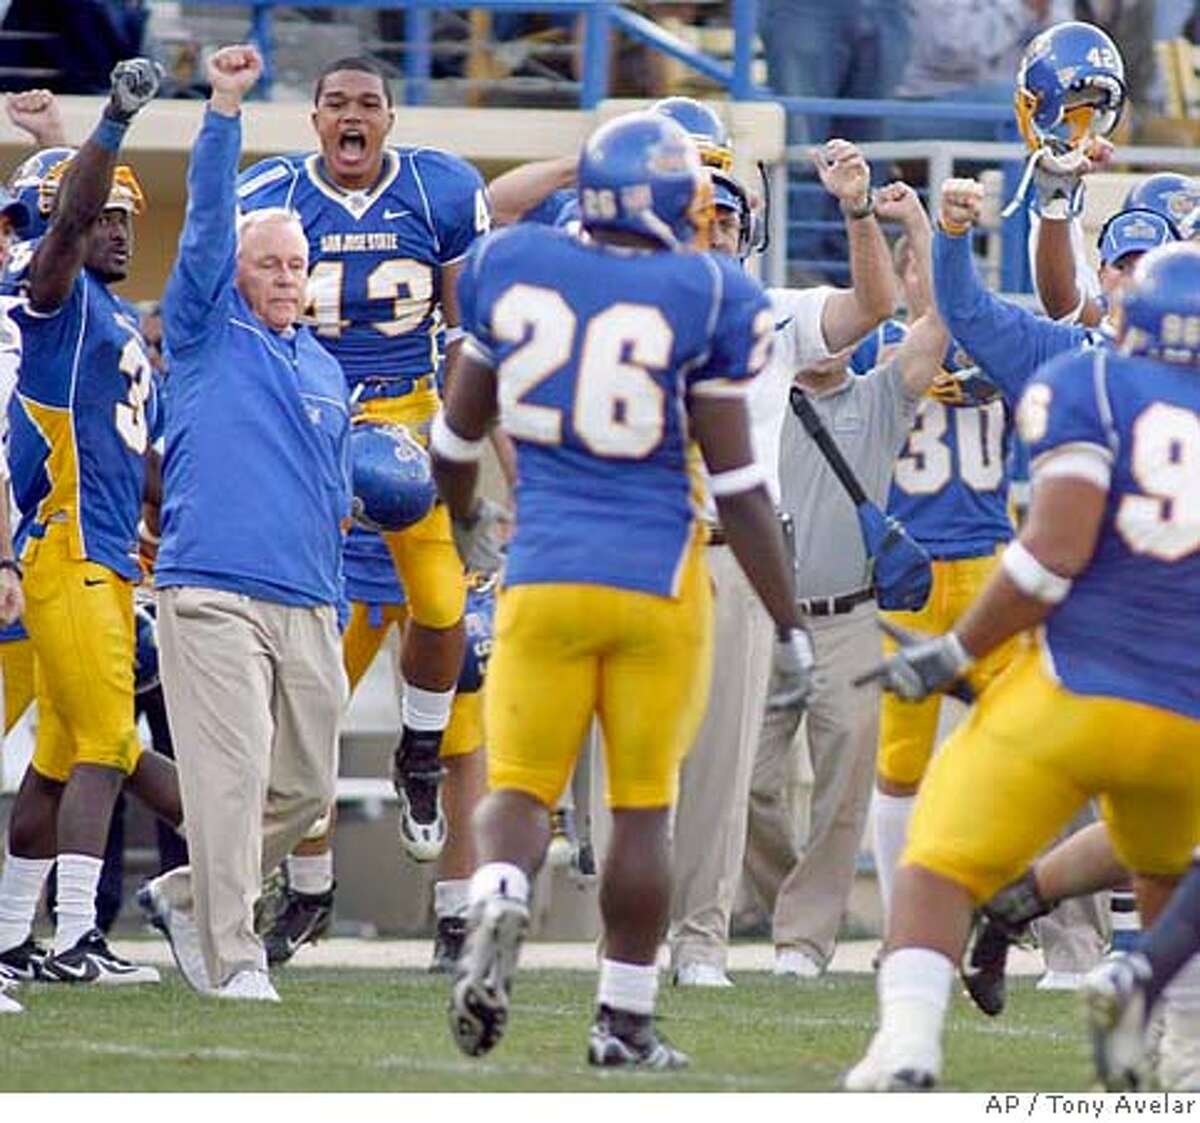 San Jose State coach Dick Tomey, left, raises his arm as his football team celebrates its 21-14 win over Utah State, Saturday, Oct. 14, 2006, in San Jose, Calif. (AP Photo/ Tony Avelar) EFE OUT